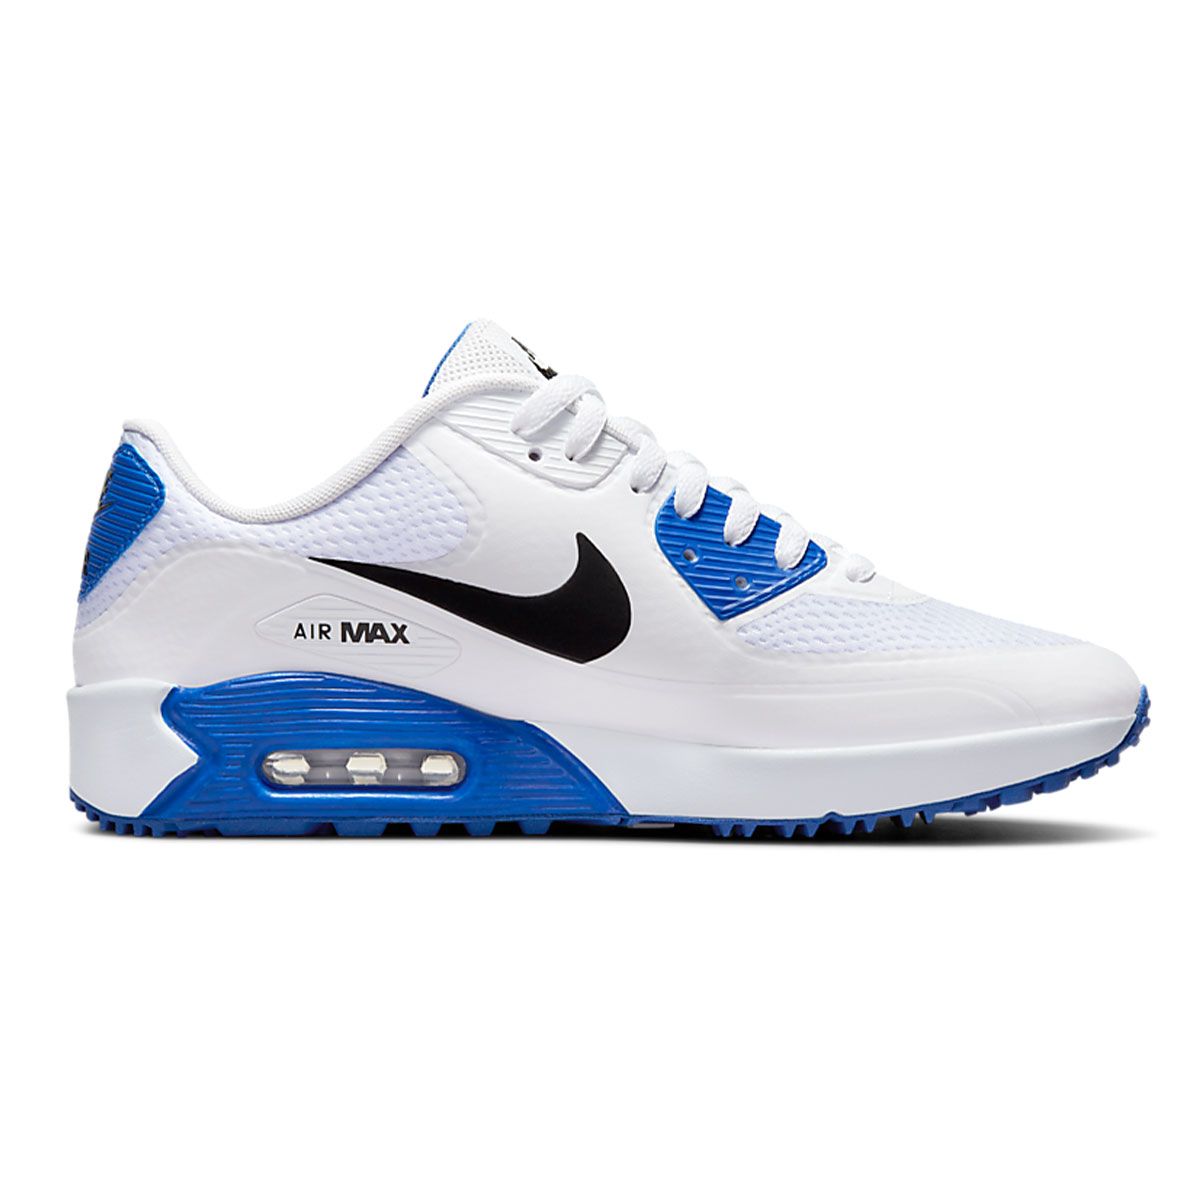 Buy Men's Nike Air Max Invigor Shoes Online | Centrepoint UAE